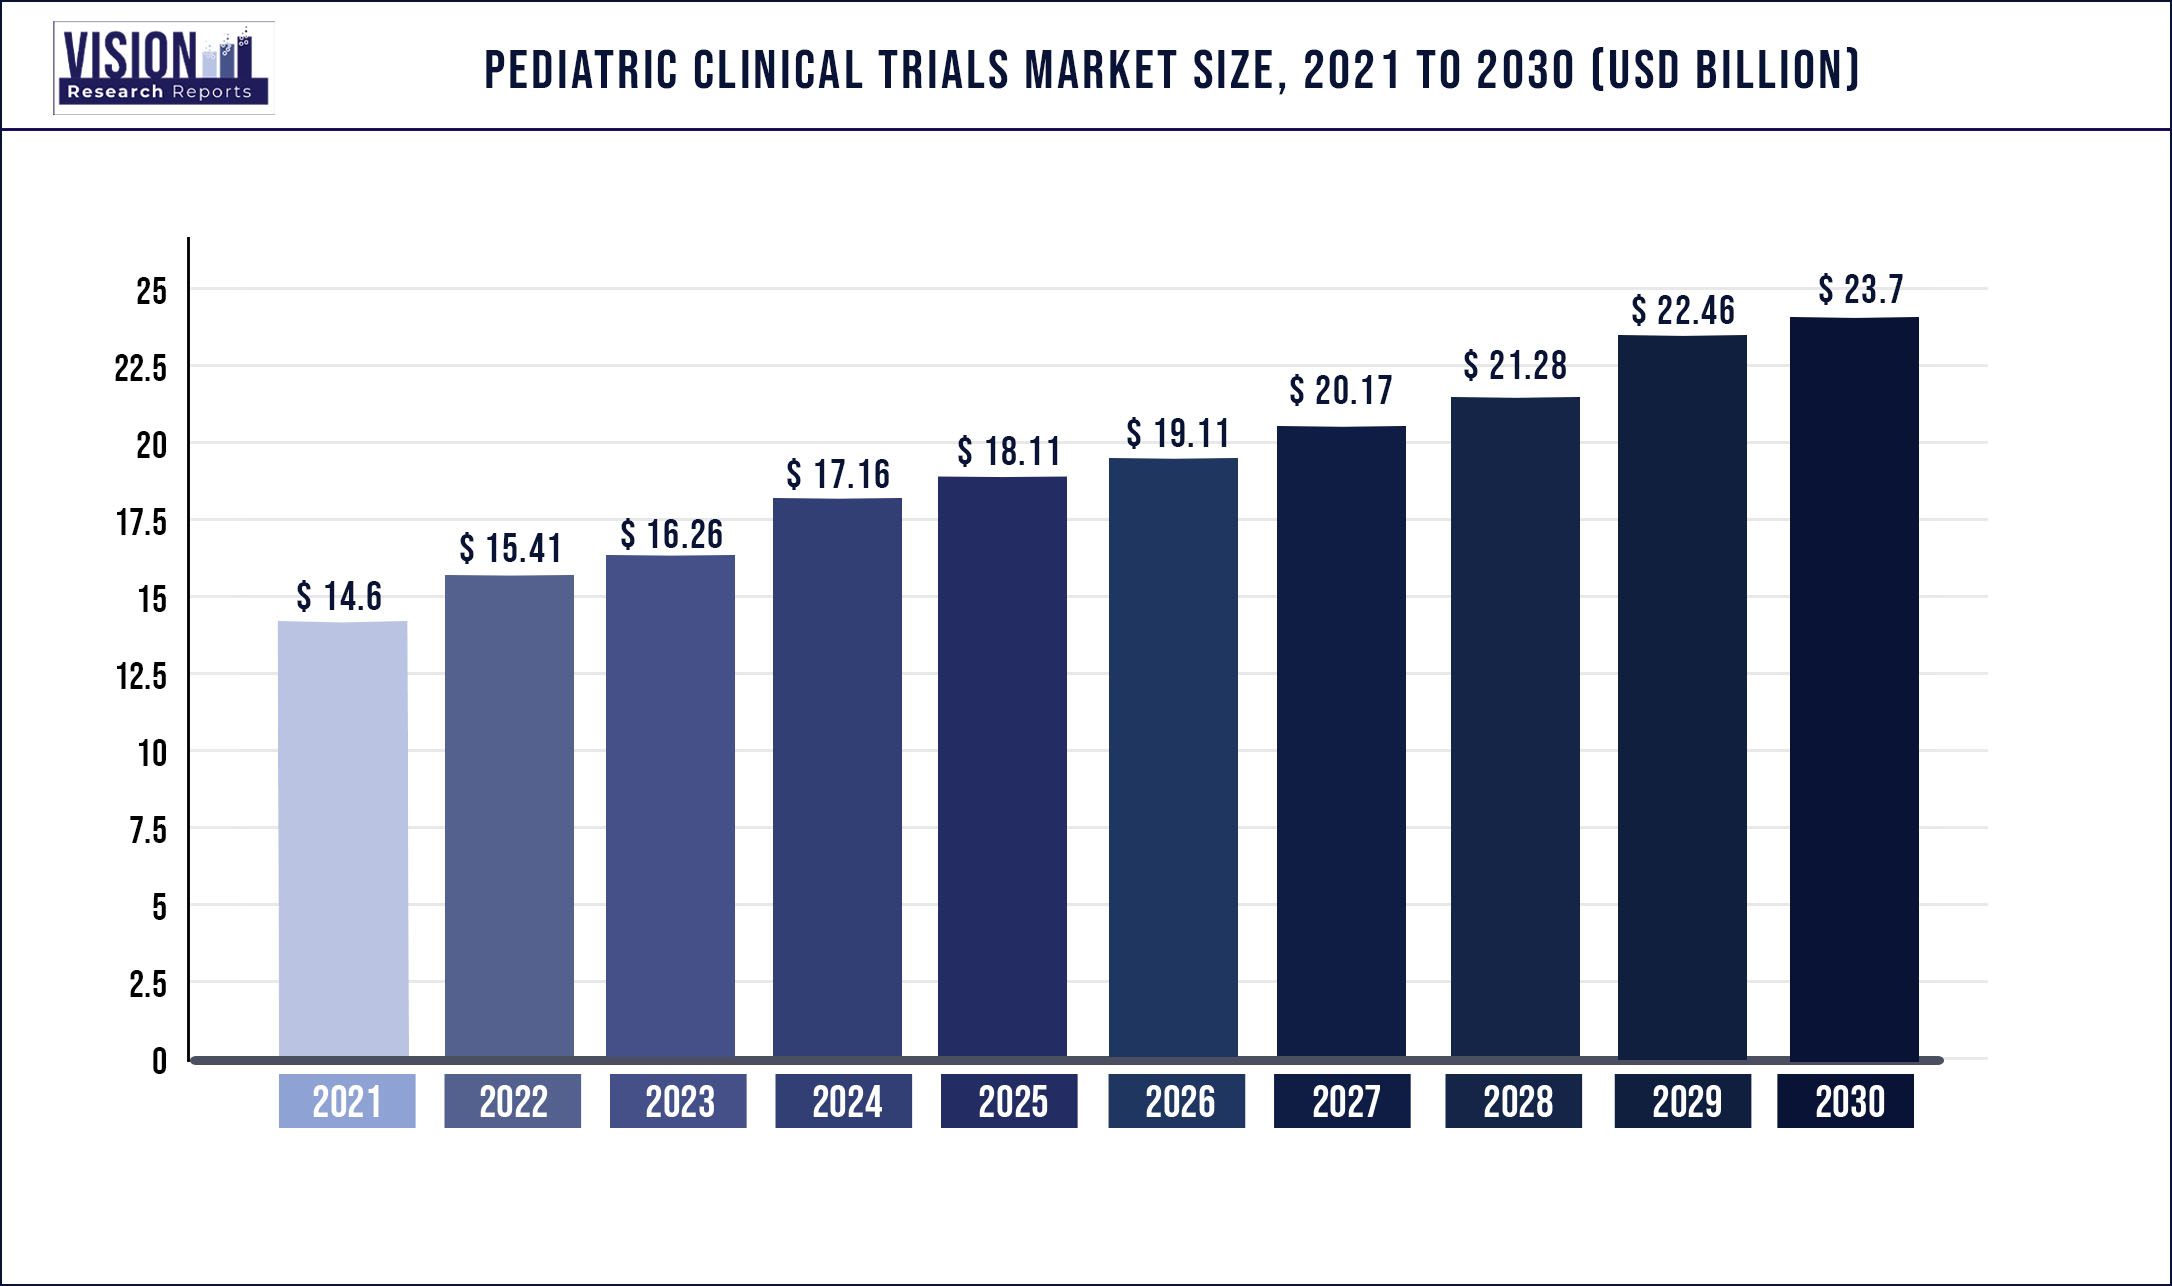 Pediatric Clinical Trials Market Size 2021 to 2030